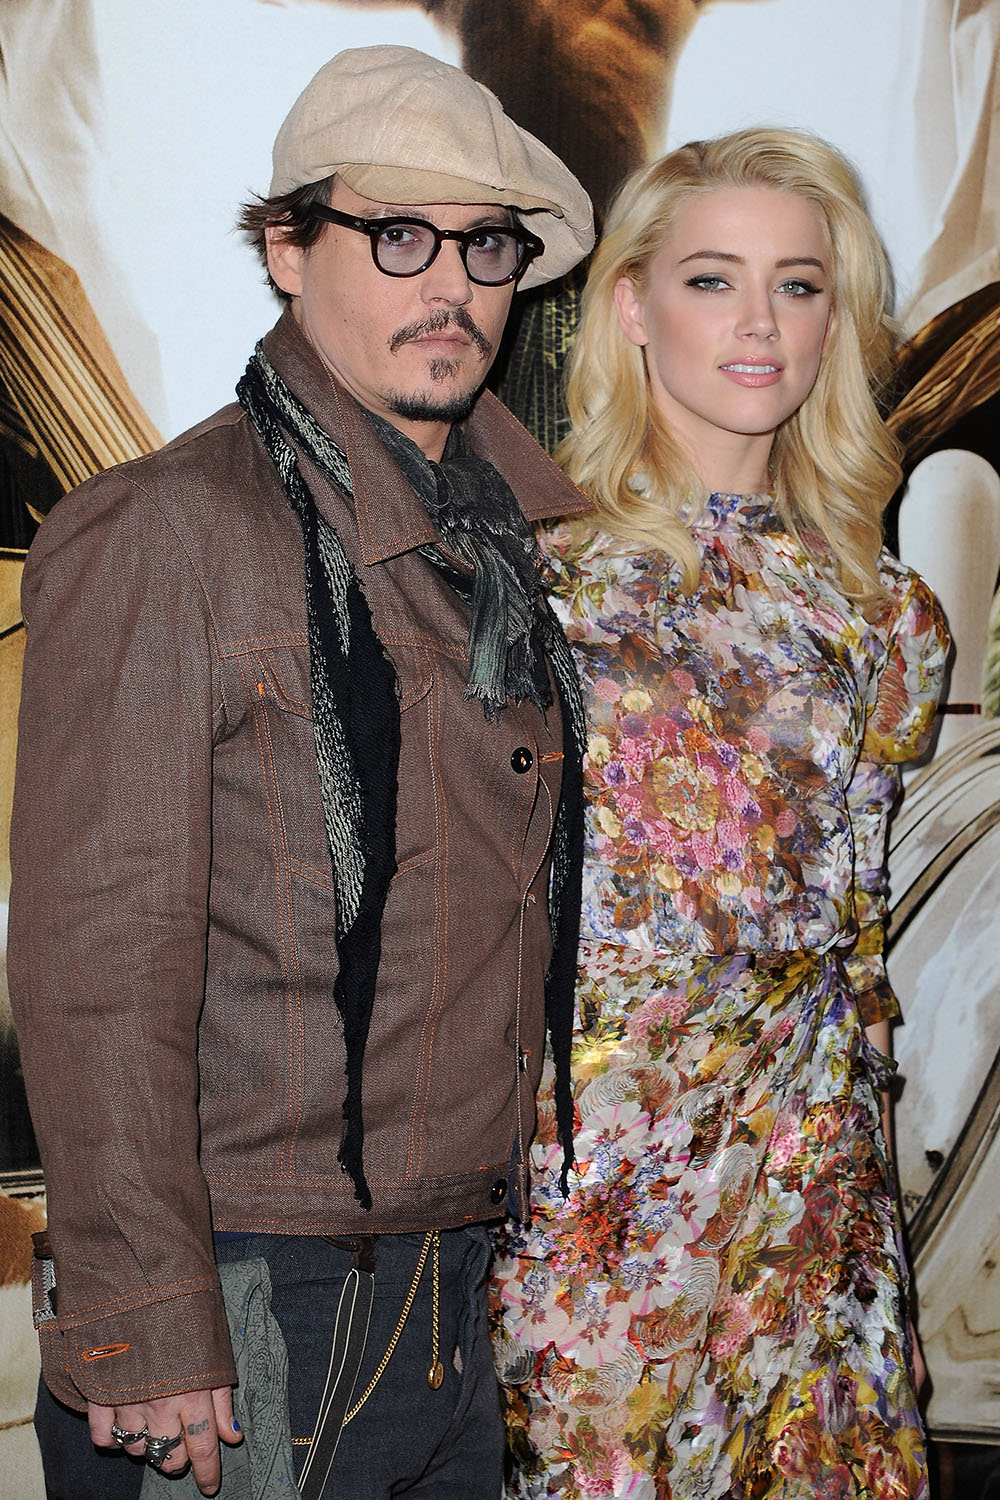 Johnny Depp and Amber Heard at a photocall for their film The Rum Diary in Paris in November, 2011.